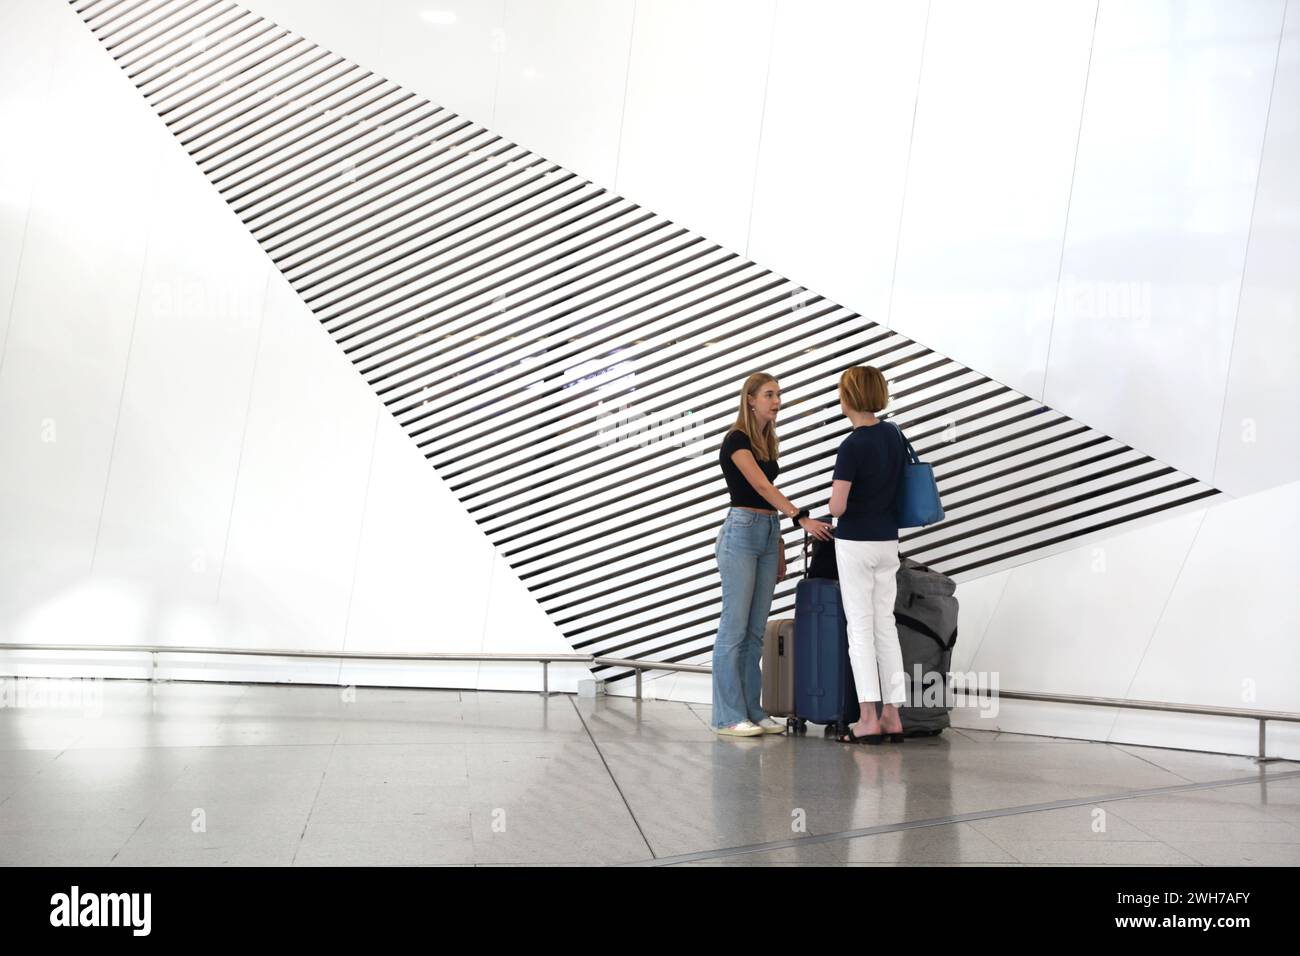 Athens Greece Athens International Airport (AIA) Eleftherios Venizelos Women With Suitcases Standing next to Artistic Vents in the Wall Stock Photo